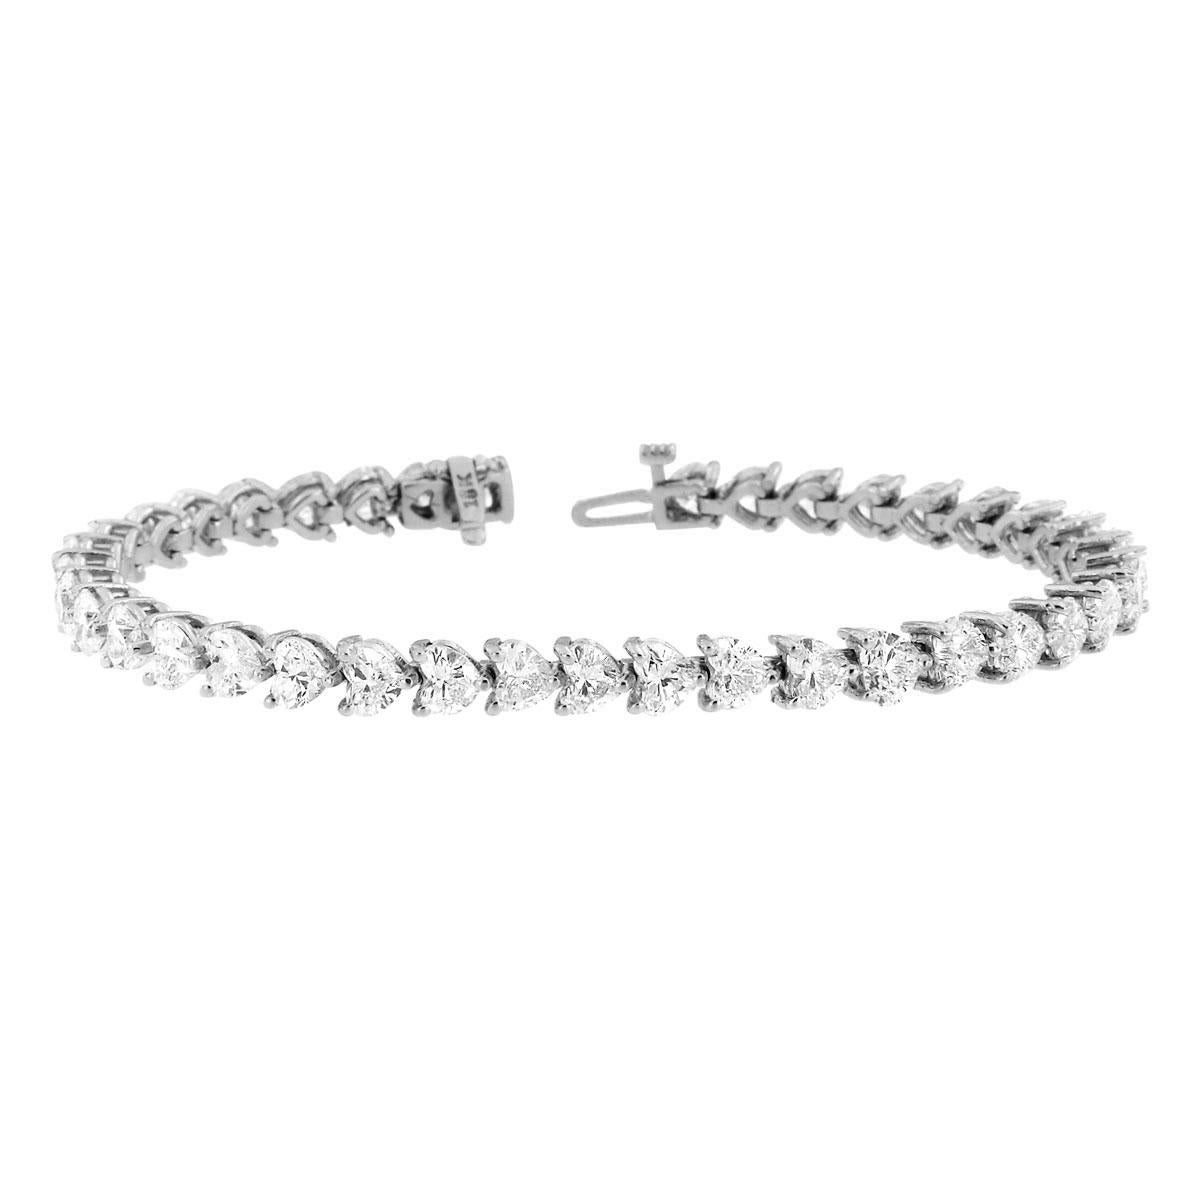 This timeless four prongs diamonds tennis bracelet feature 39 perfectly matched Heart Shape Diamonds. Experience the Difference!

Product details: 

Center Gemstone Type: NATURAL DIAMOND
Center Gemstone Color: WHITE
Center Gemstone Shape: